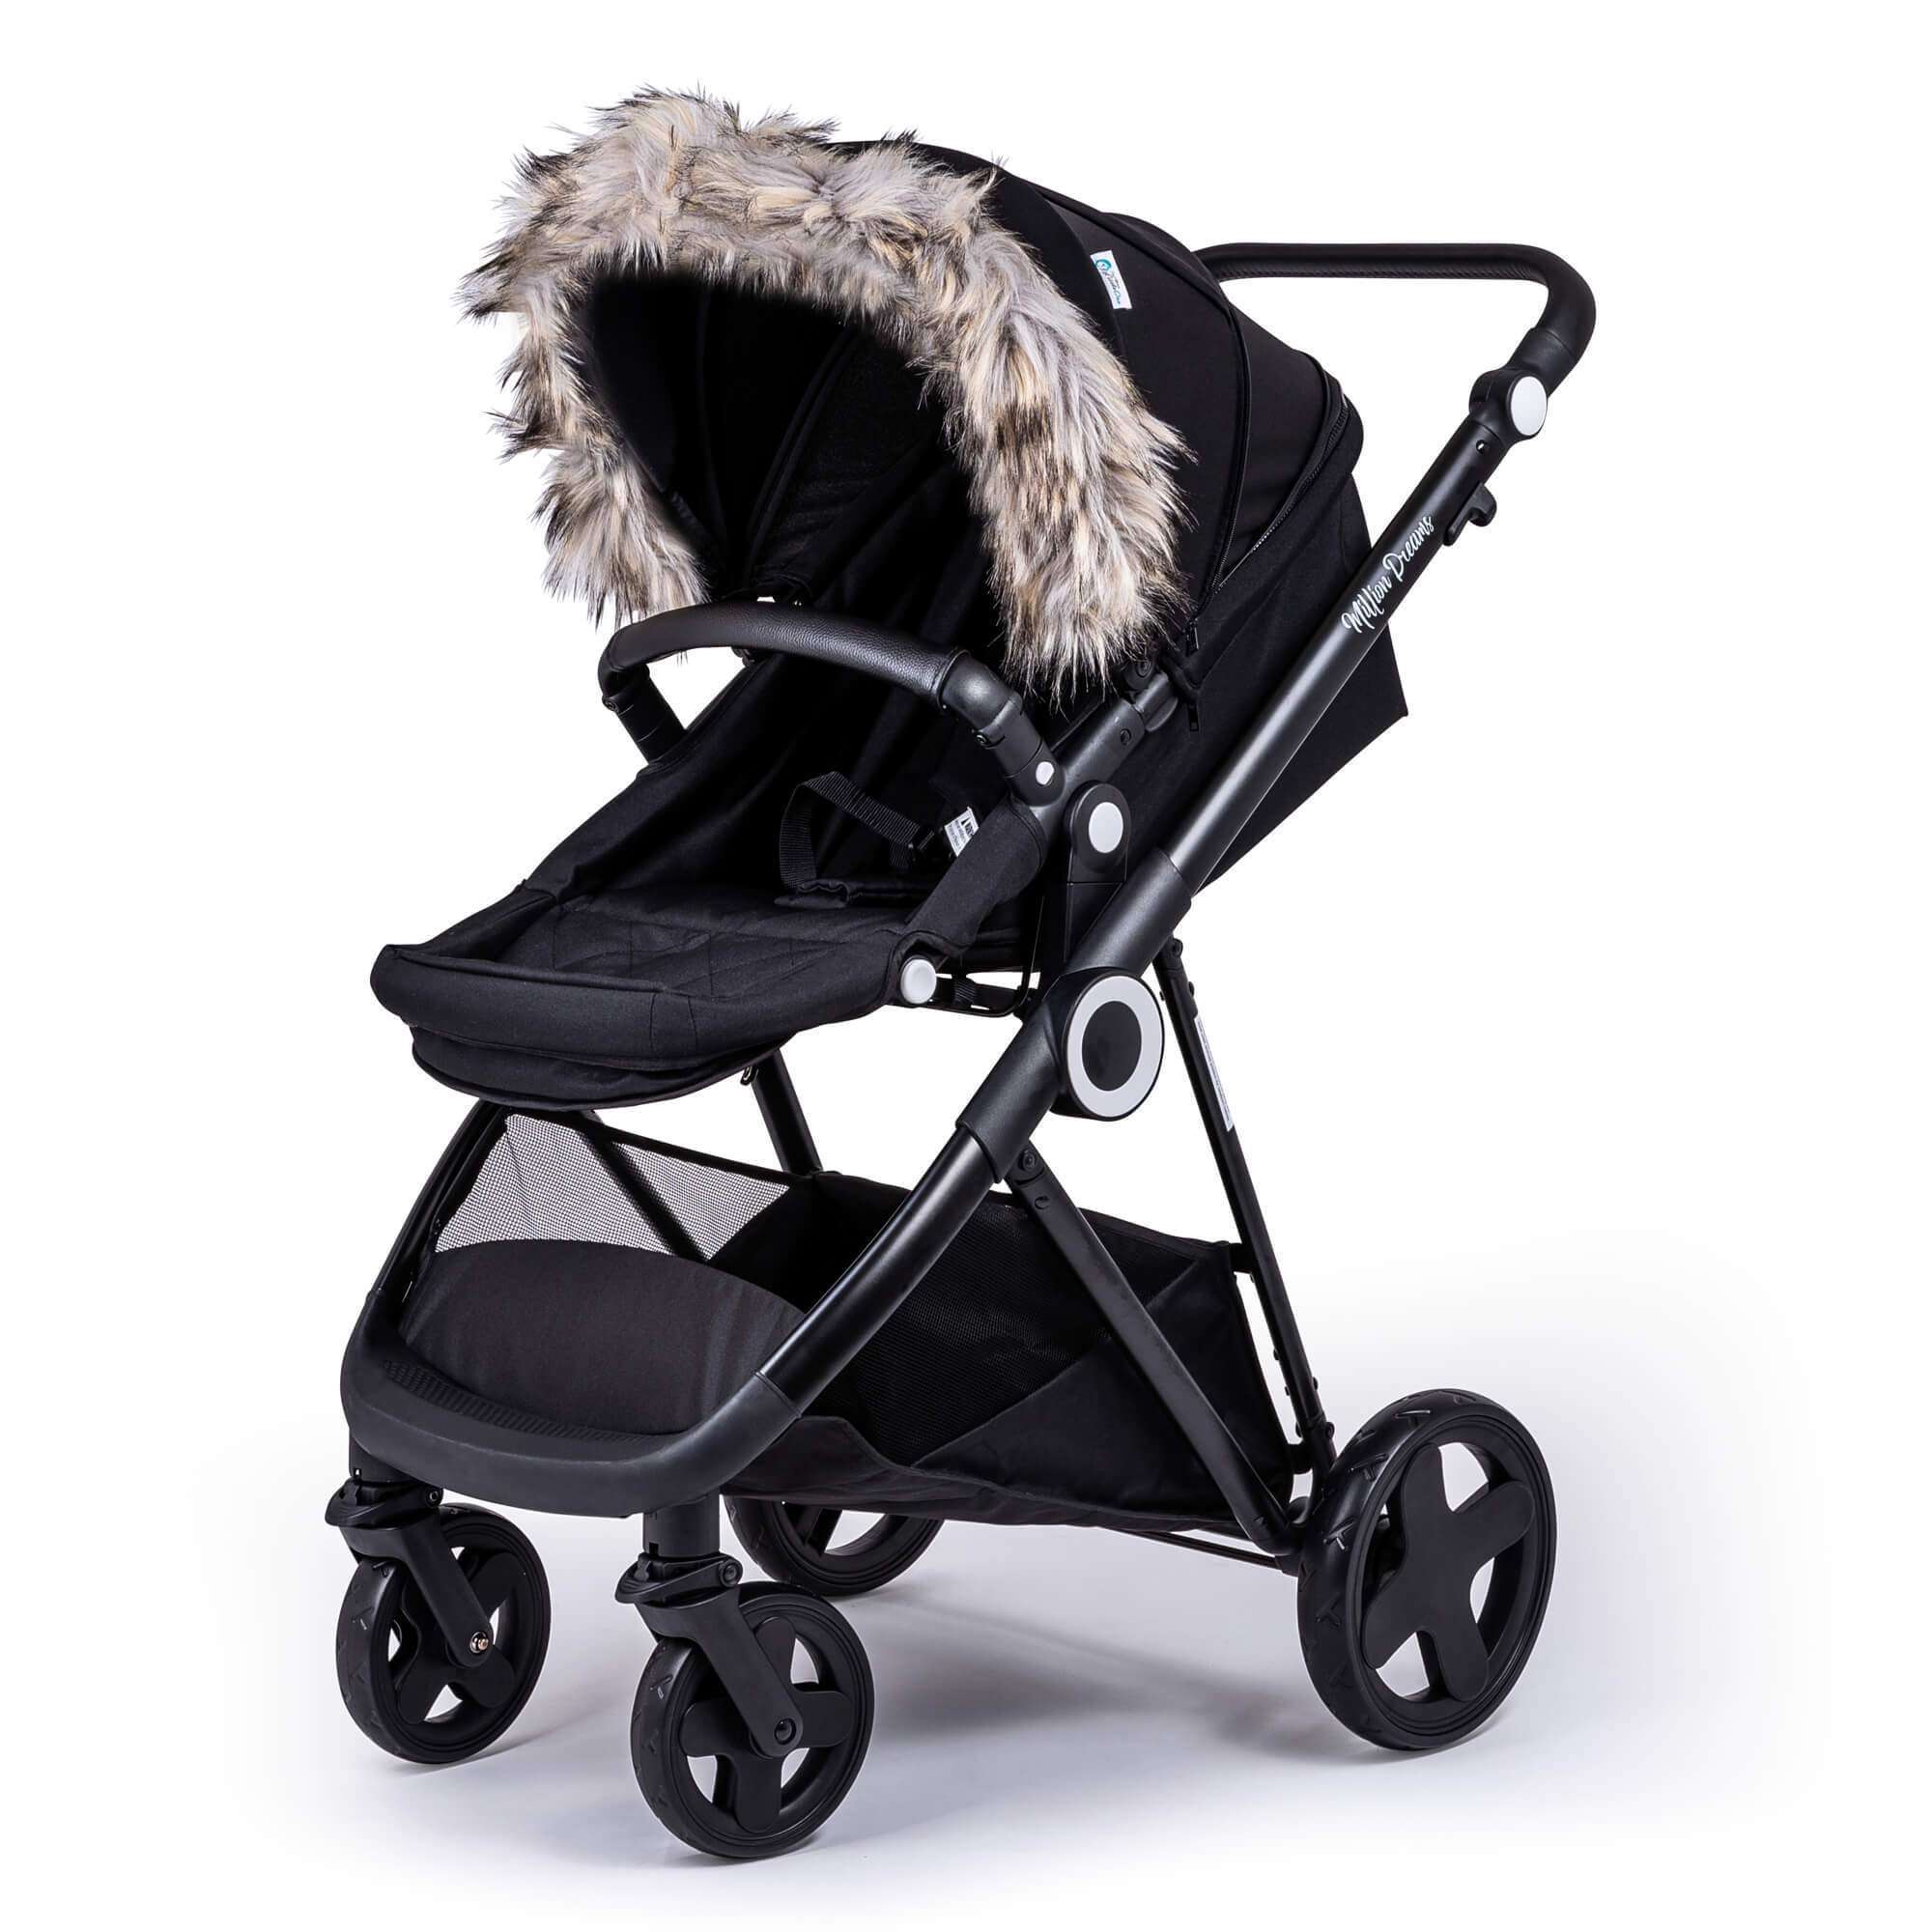 Pram Fur Hood Trim Attachment for Pushchair Compatible with Greentom - Light Grey / Fits All Models | For Your Little One